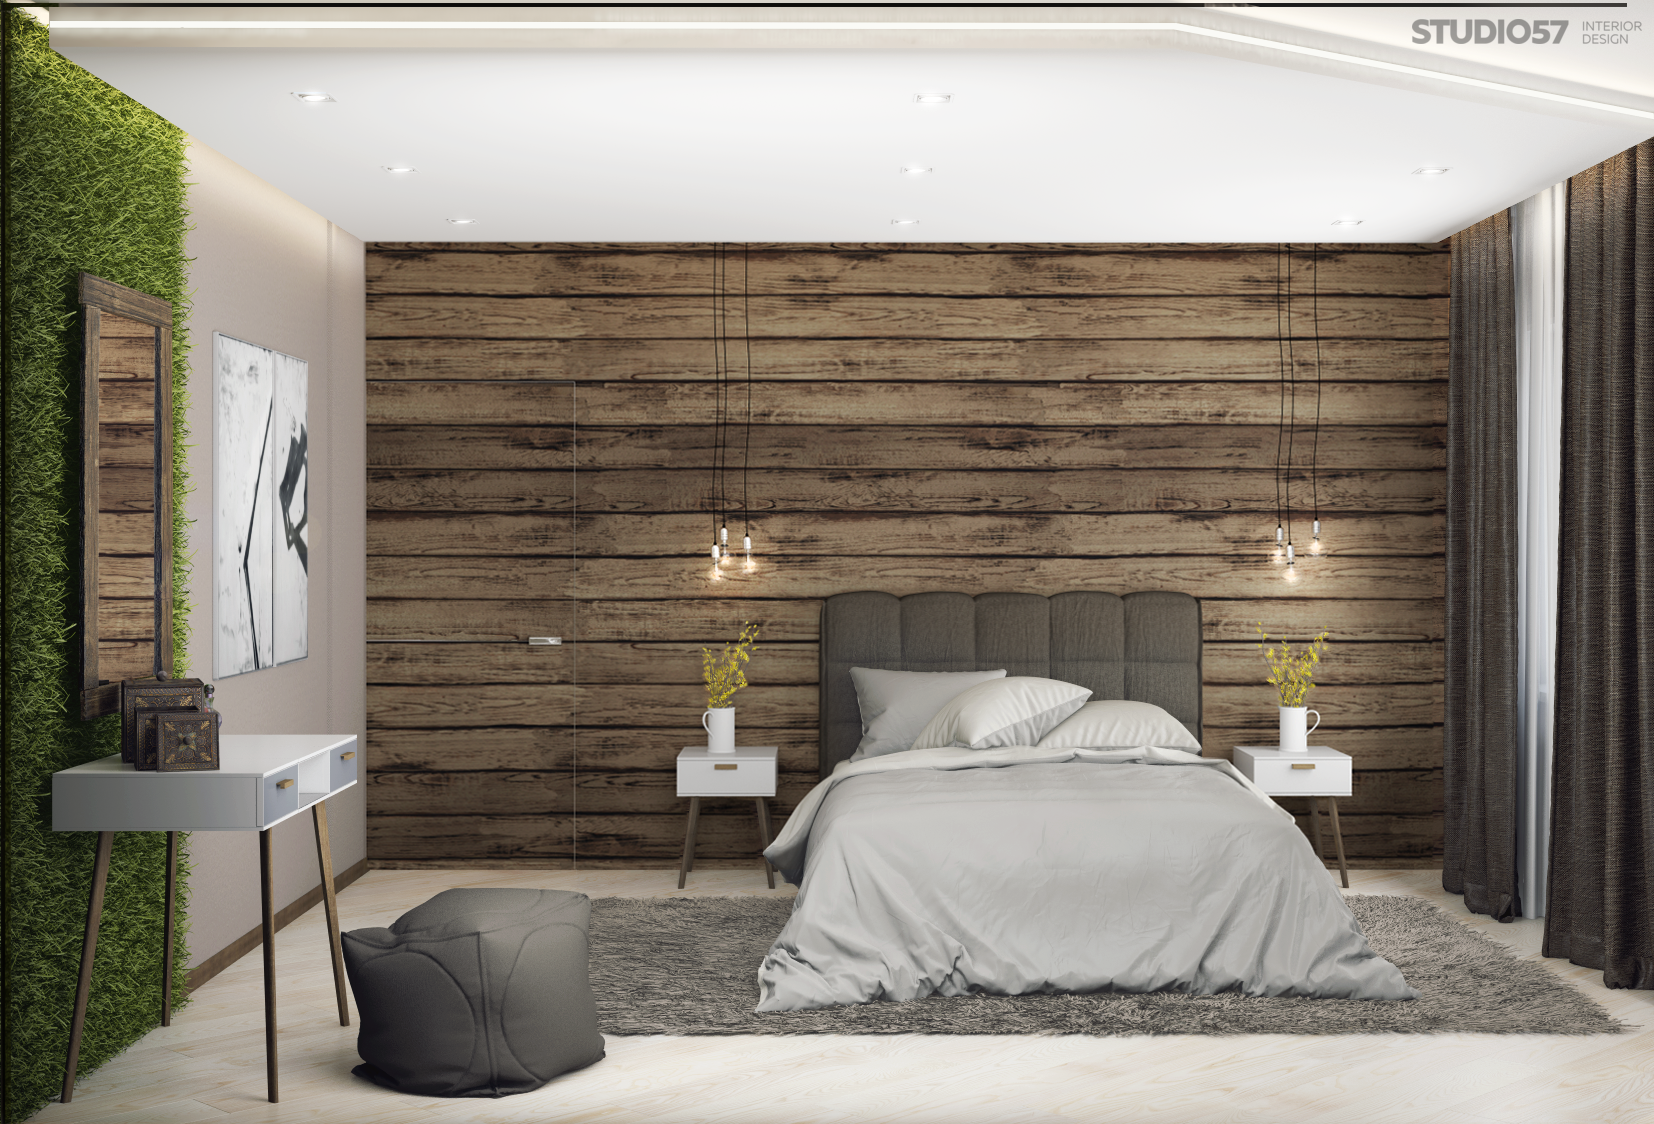 Bedroom in the style of Eco